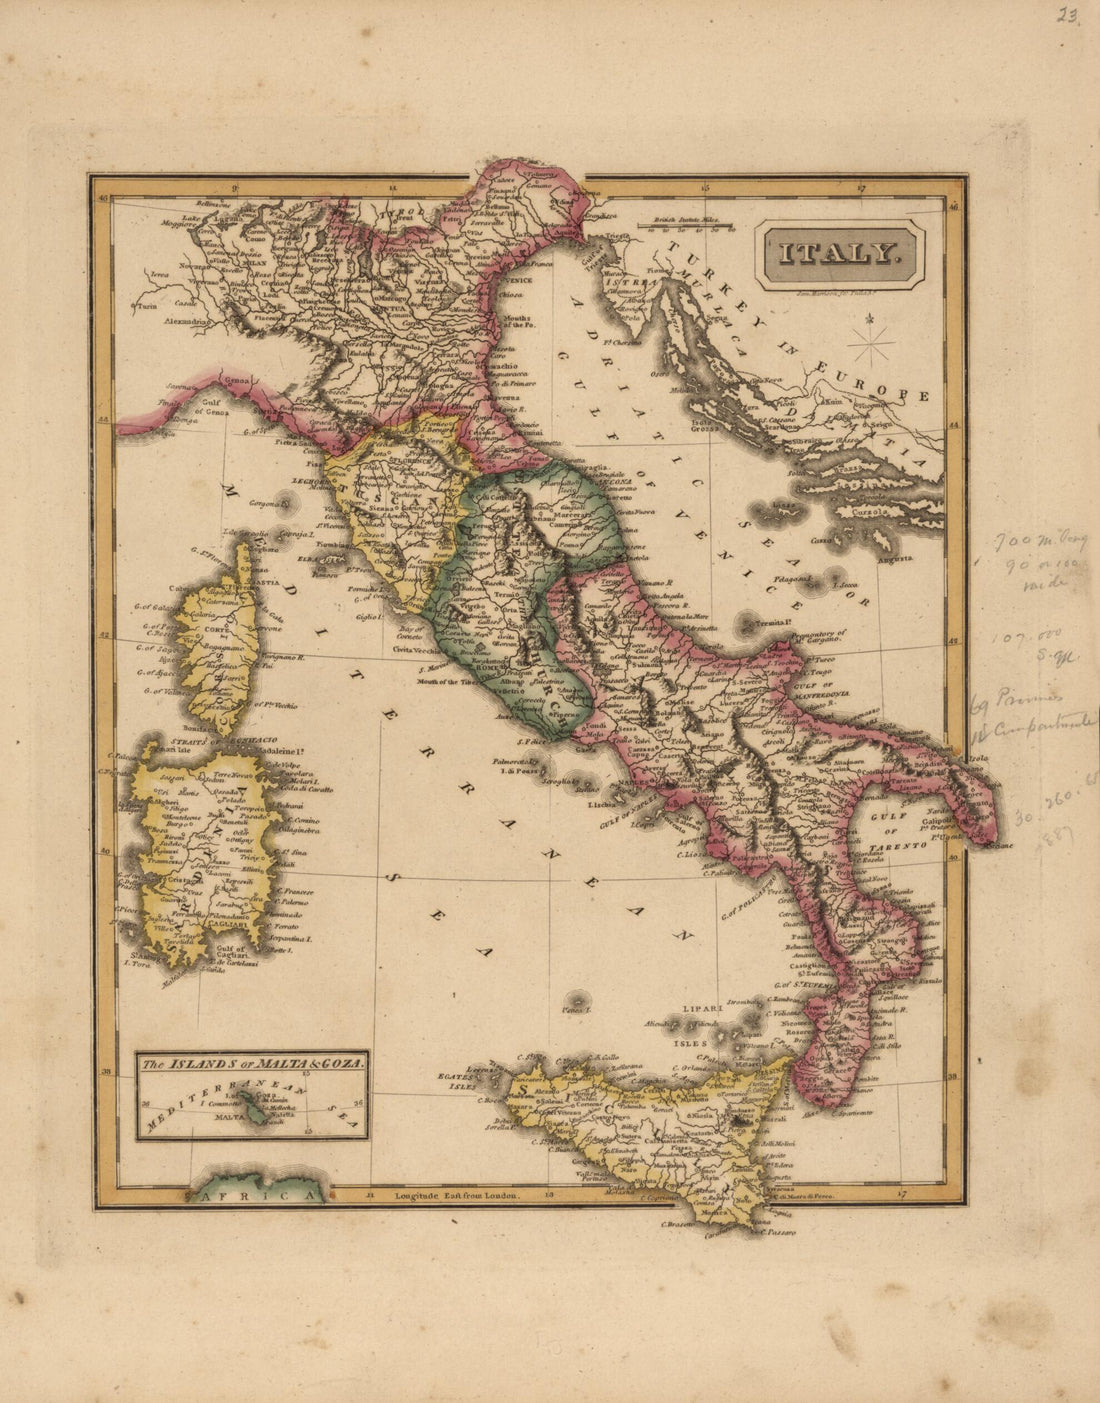 This old map of Italy from a New and Elegant General Atlas, Containing Maps of Each of the United States  from 1817 was created by Henry Schenck Tanner in 1817